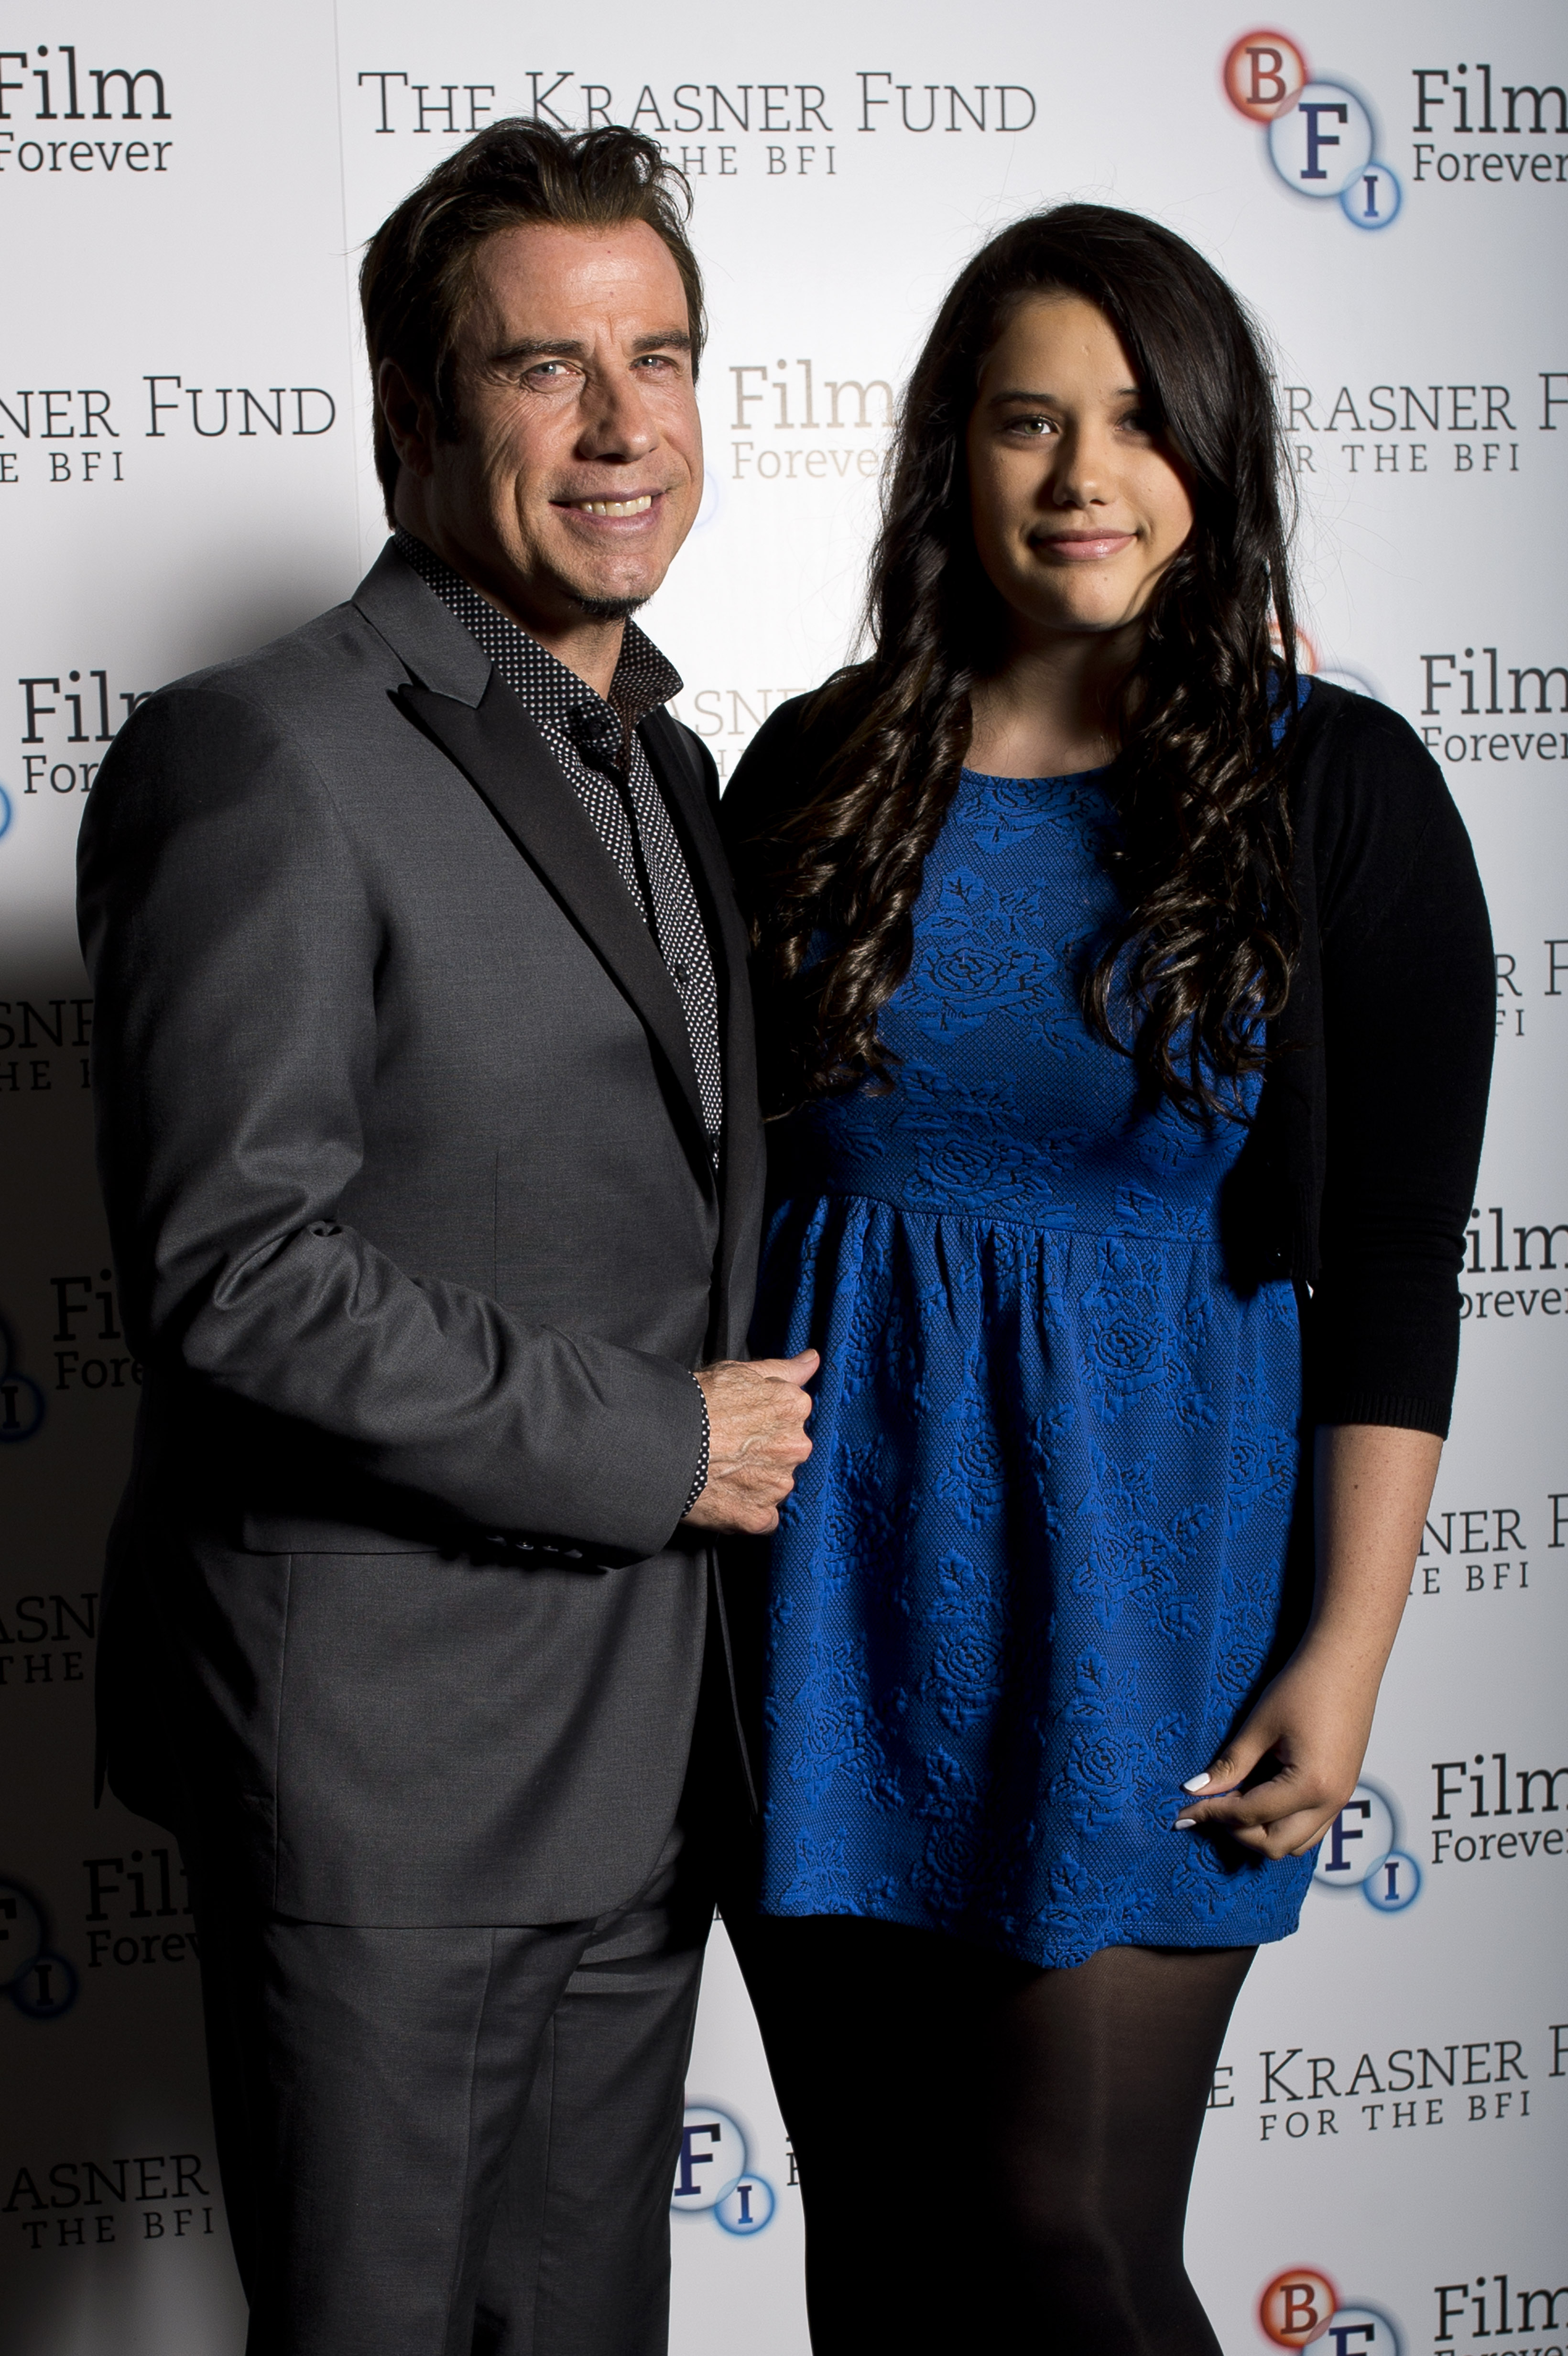 John and Ella Travolta at a BFI as part of The Krasner Fund event in London, England on June 25, 2013 | Source: Getty Images